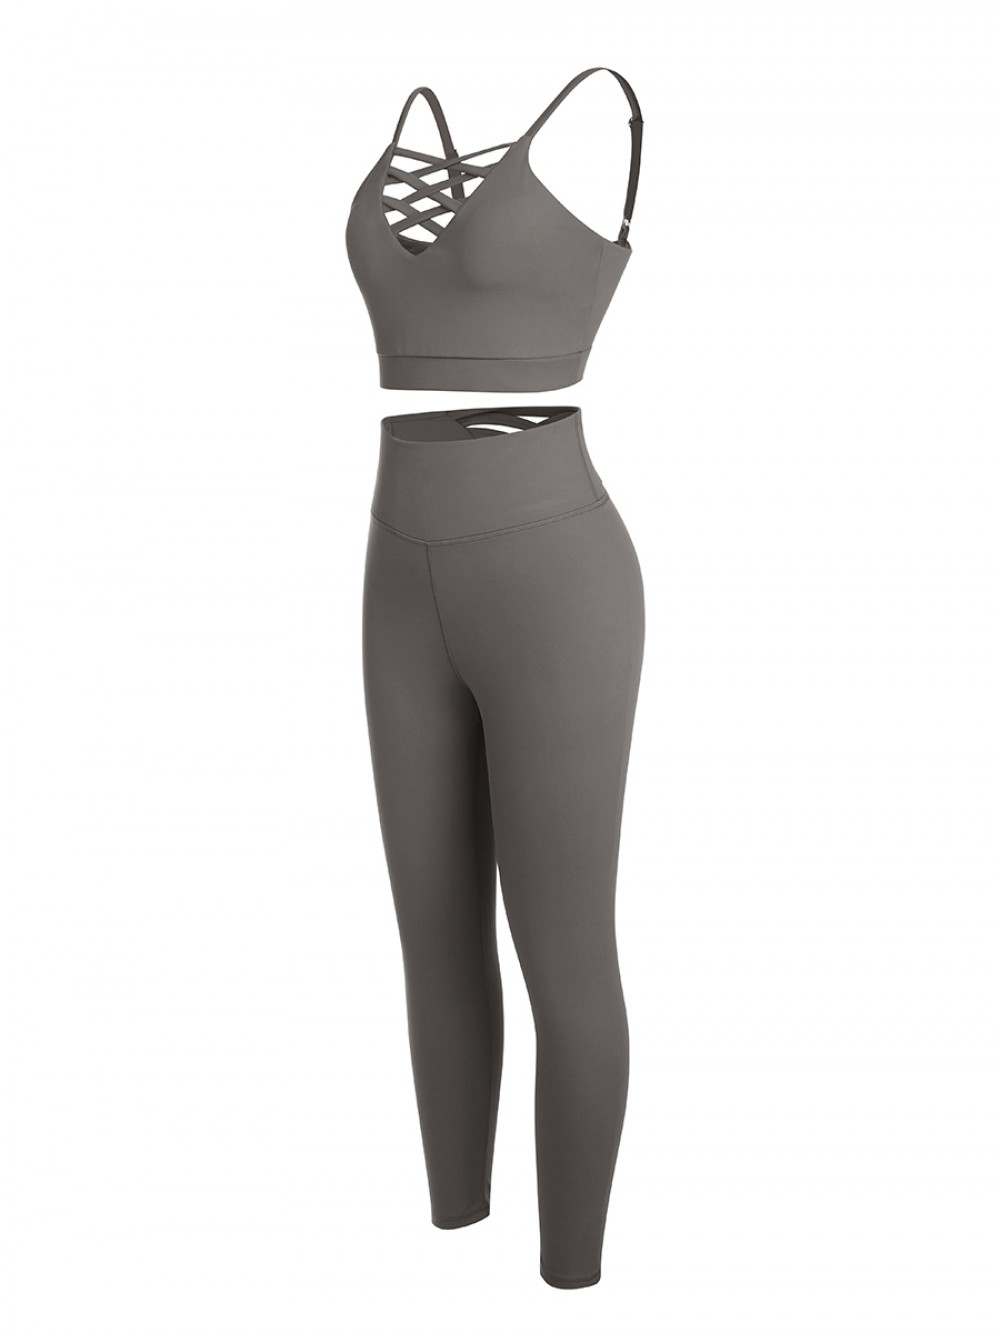 Gray Sports Sets Low Back Wide Waistband Pockets Natural Outfit